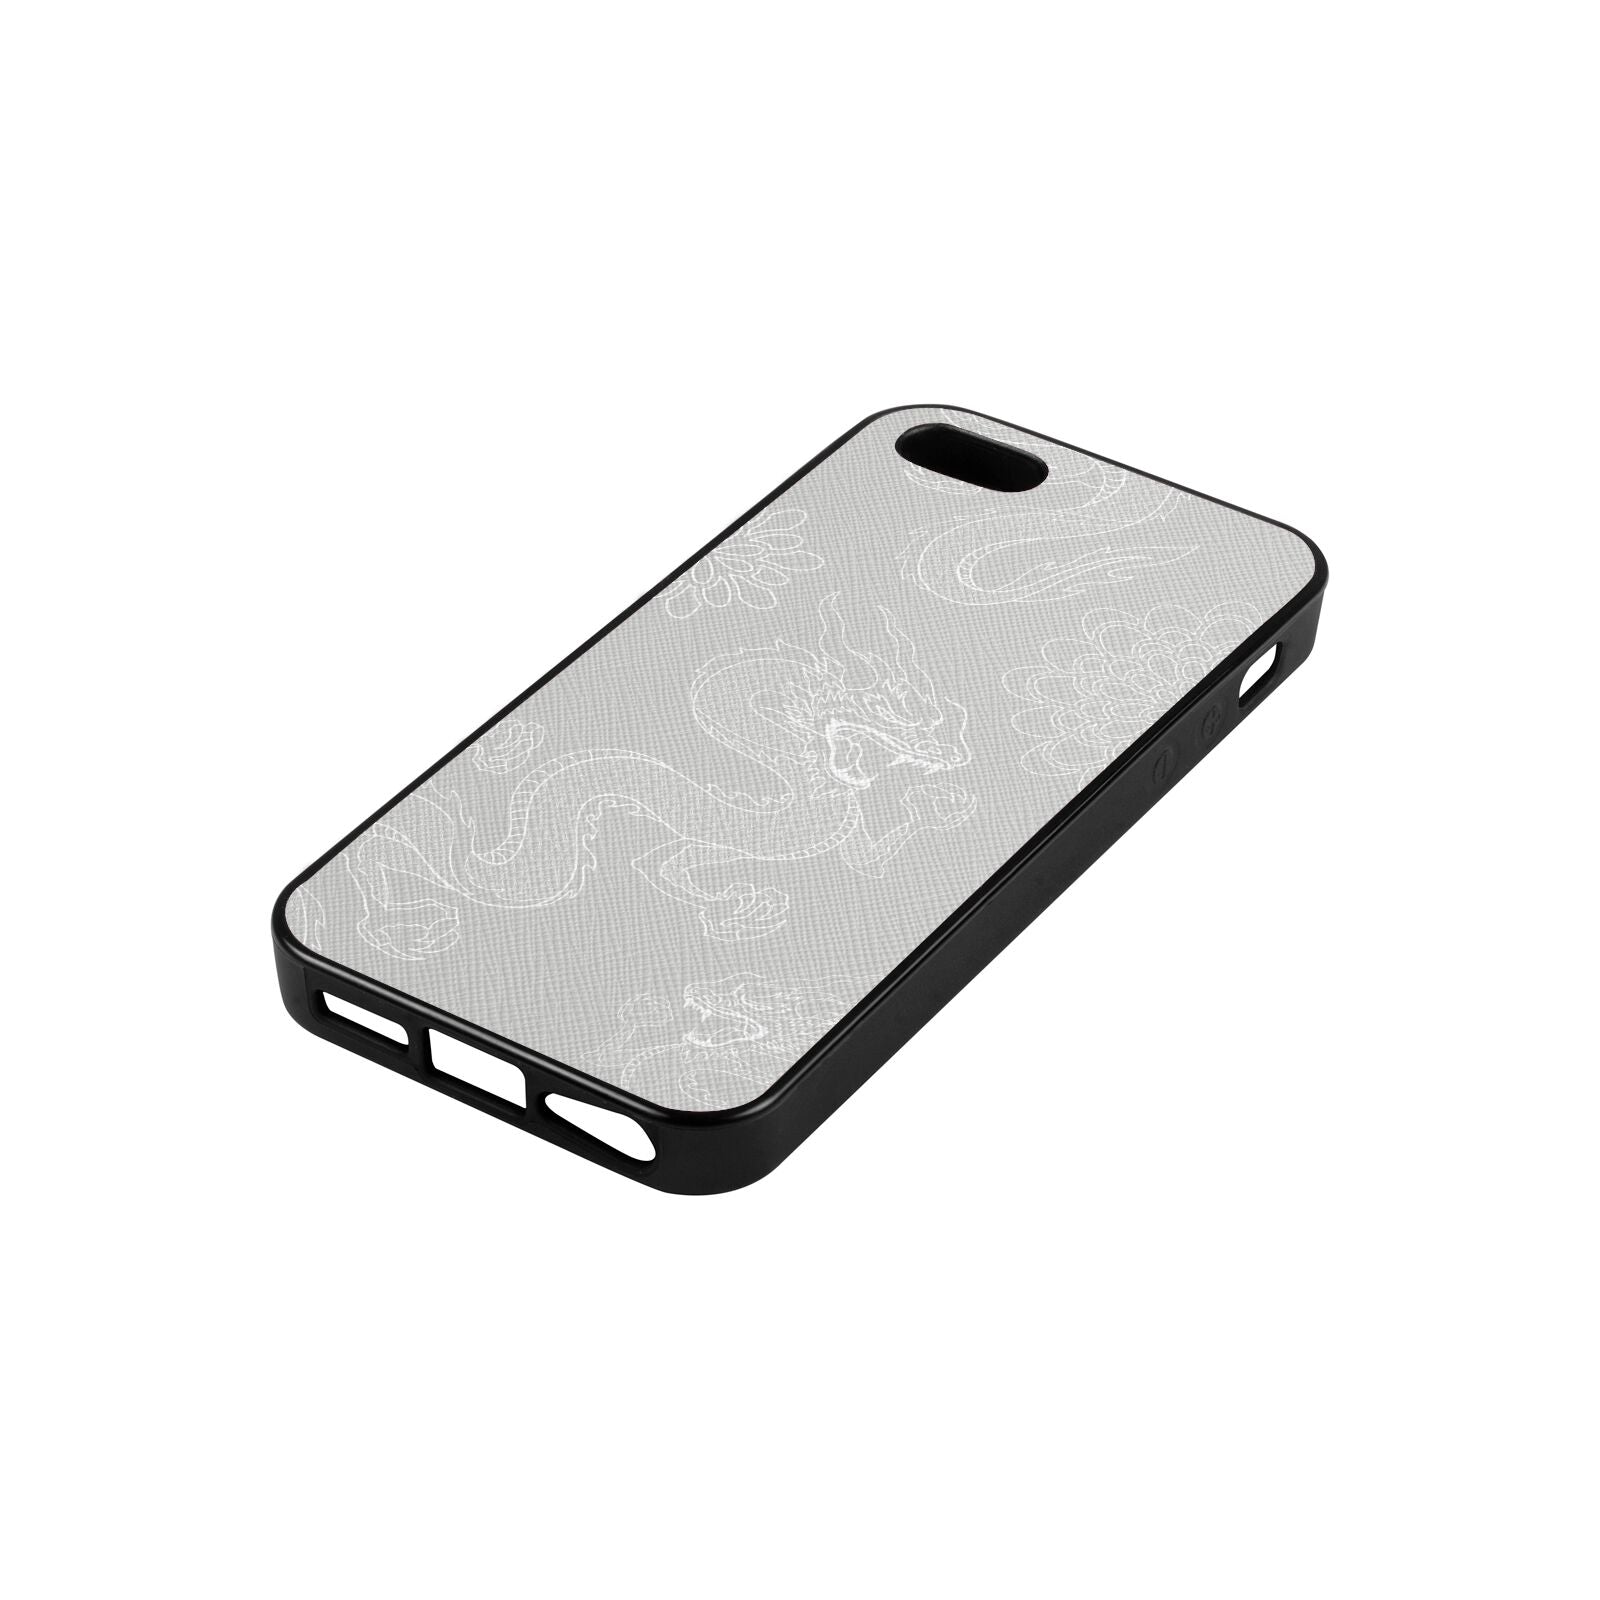 Dragons Silver Saffiano Leather iPhone 5 Case Side Angle